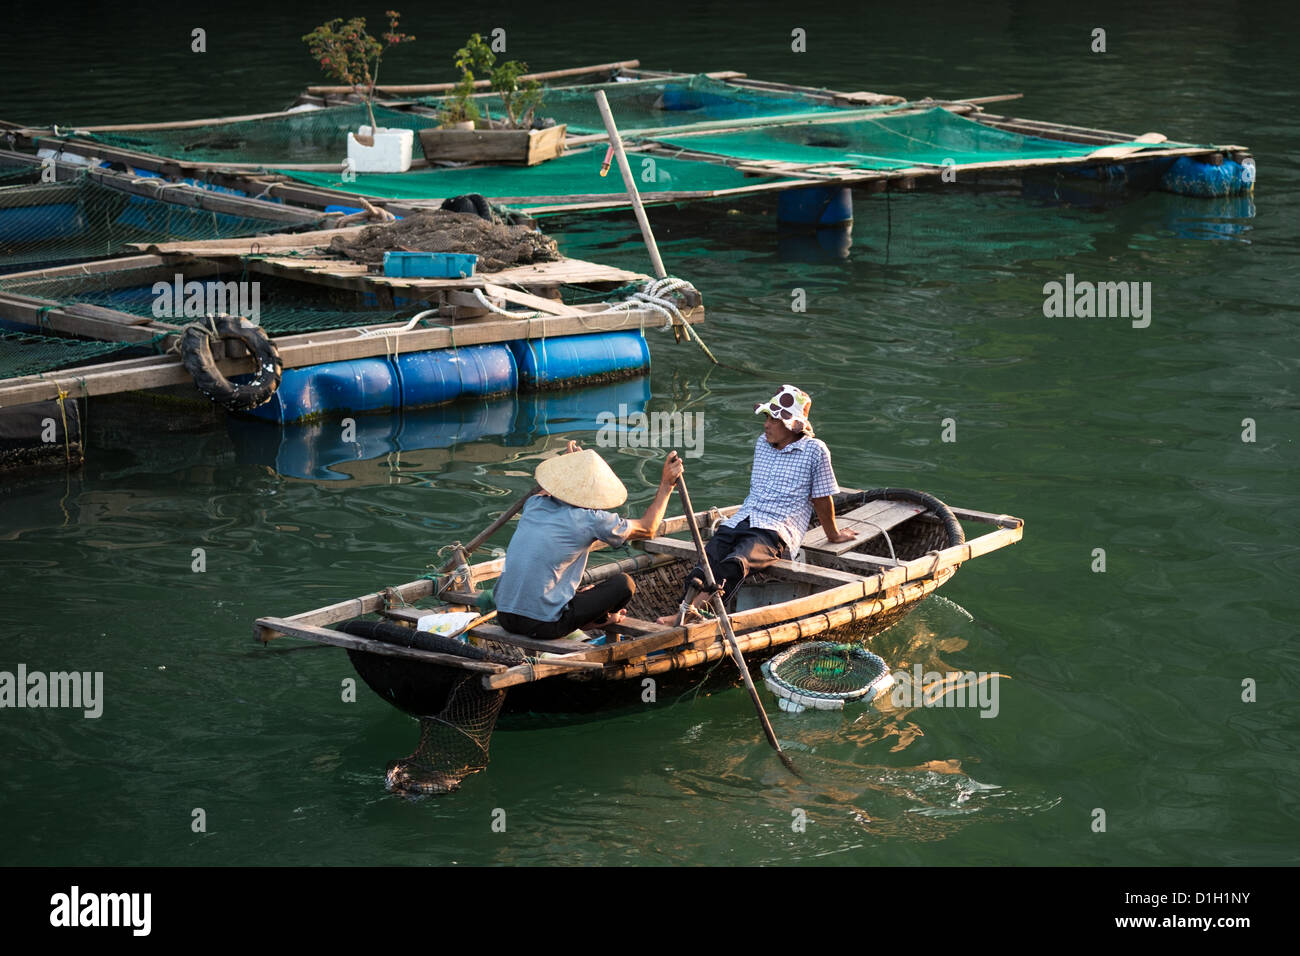 https://c8.alamy.com/comp/D1H1NY/two-local-inhabitants-rowing-past-a-wooden-floating-platform-covered-D1H1NY.jpg